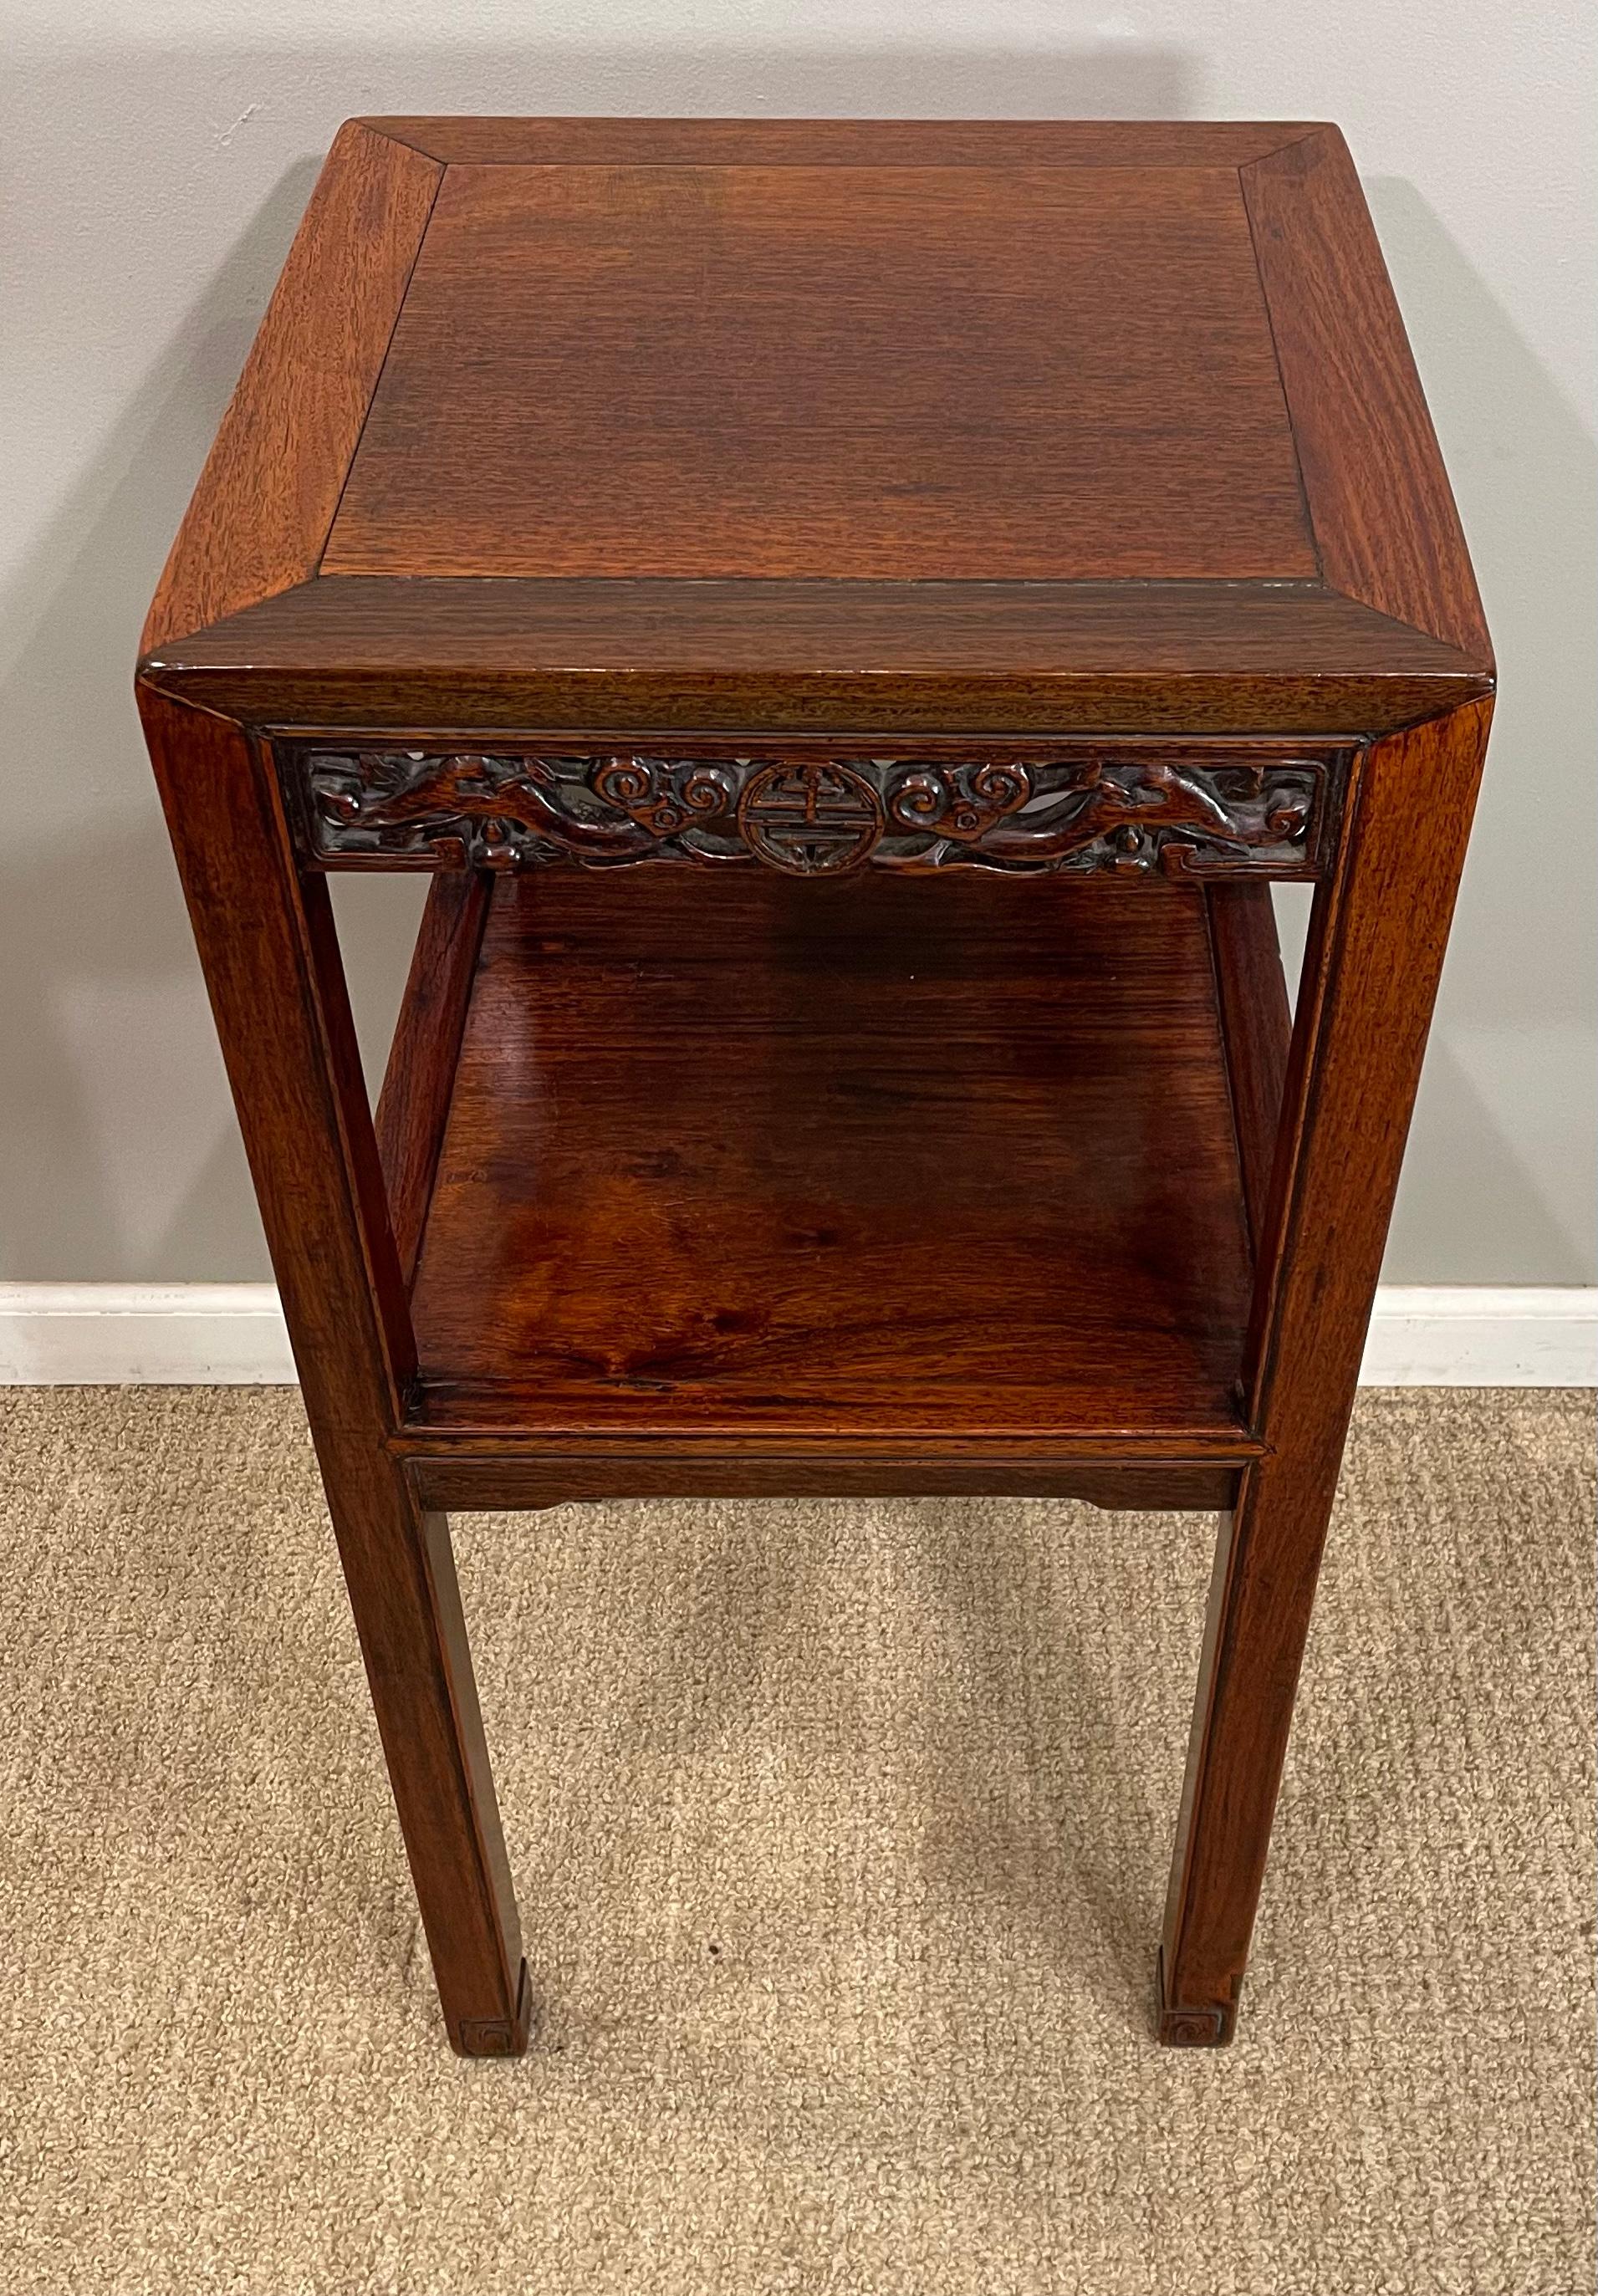 Wood Chinese Hardwood 'Hungmu' Tea Table, Late 19th Century / Early 20th Century For Sale